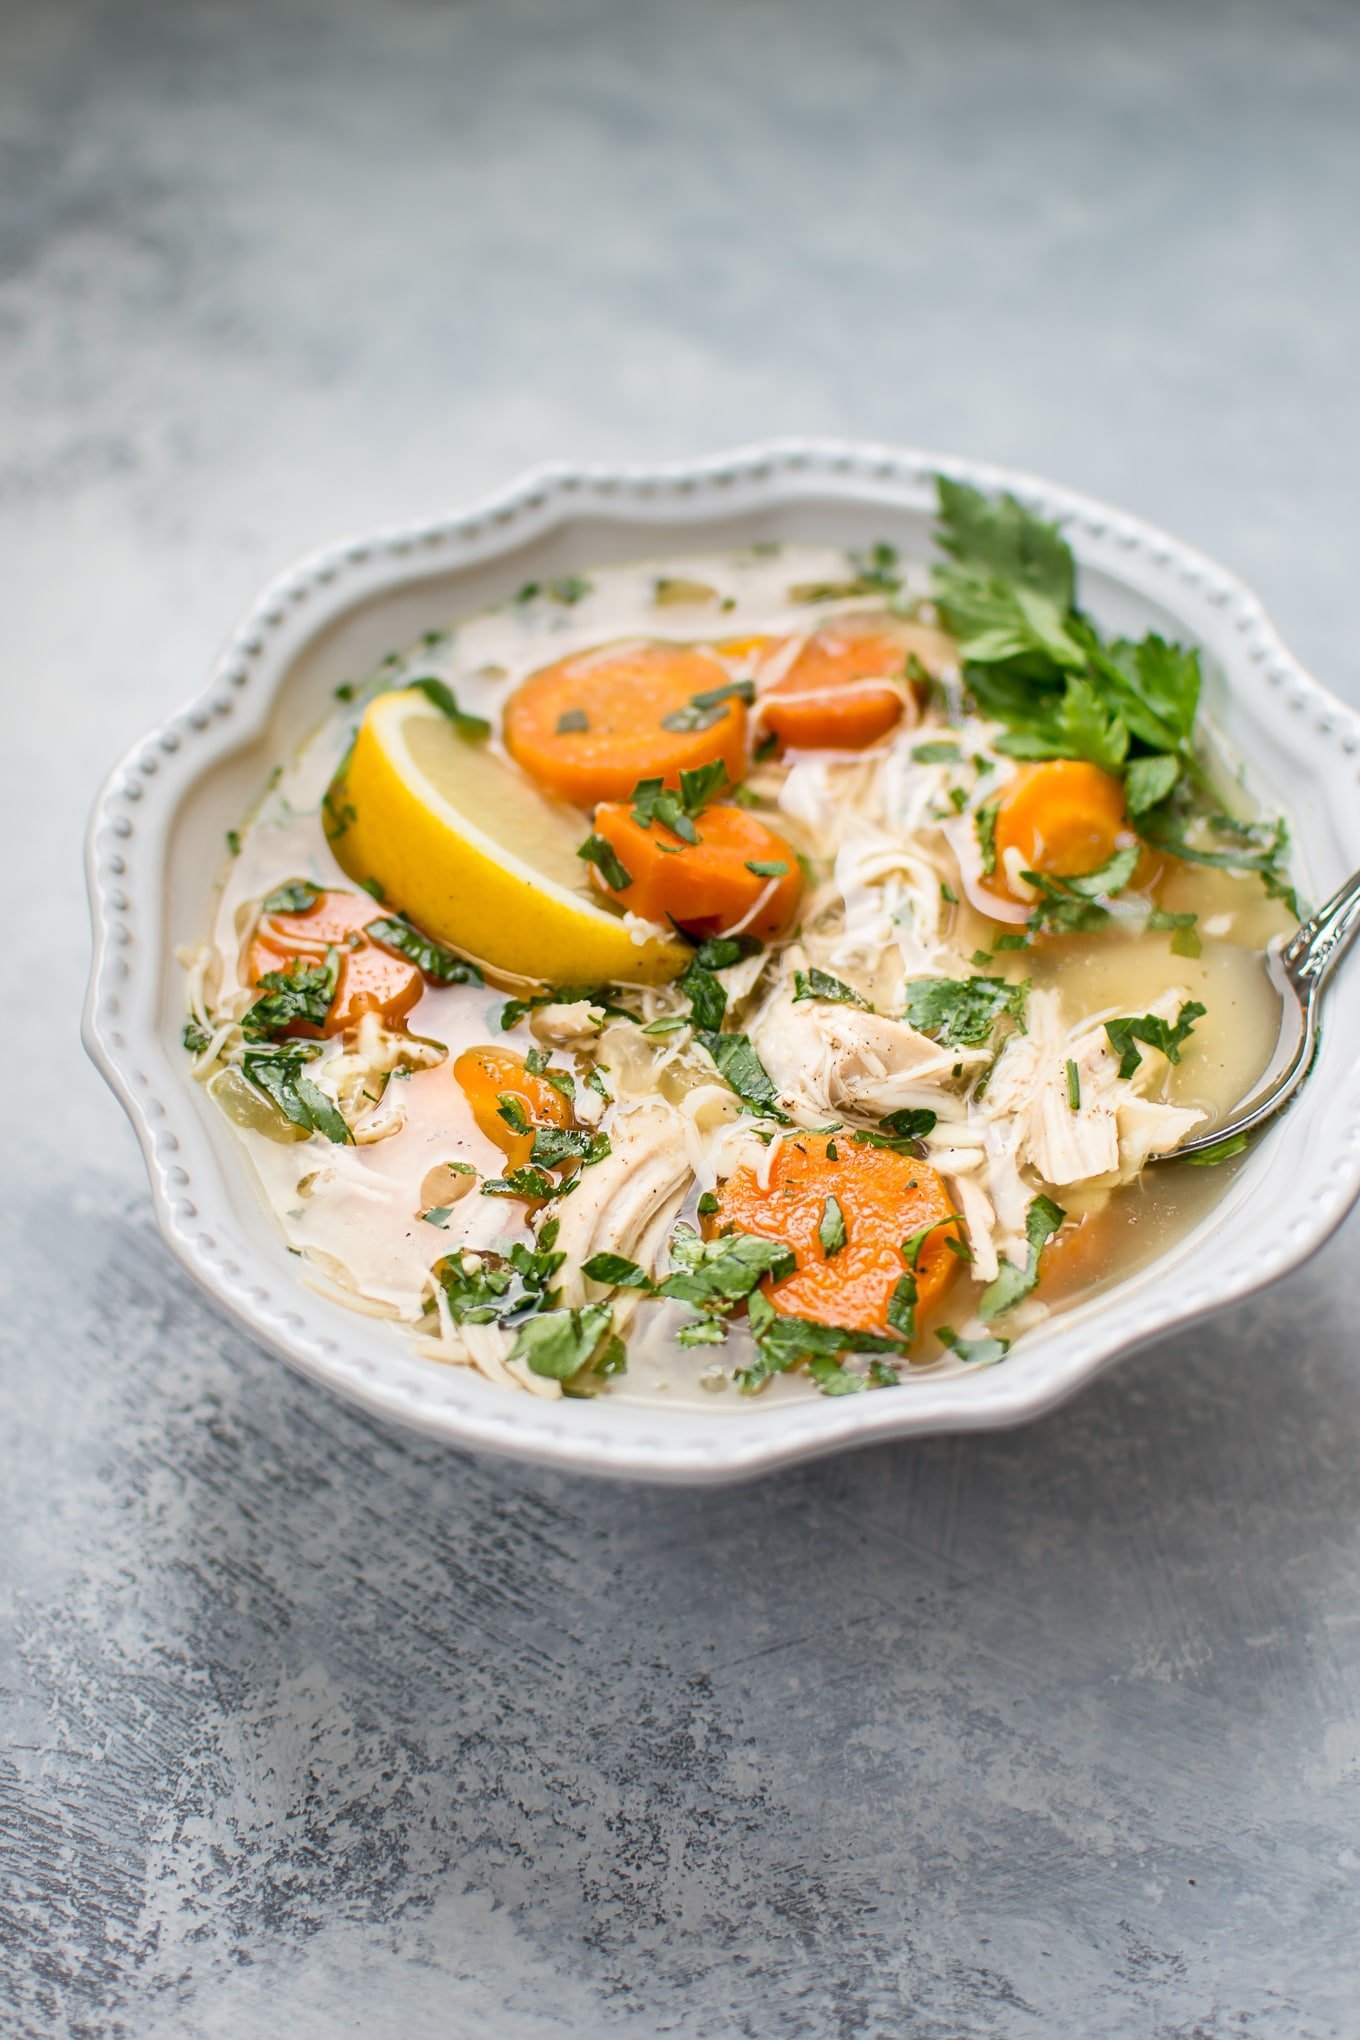 How to make lemon chicken orzo soup in the Crockpot.